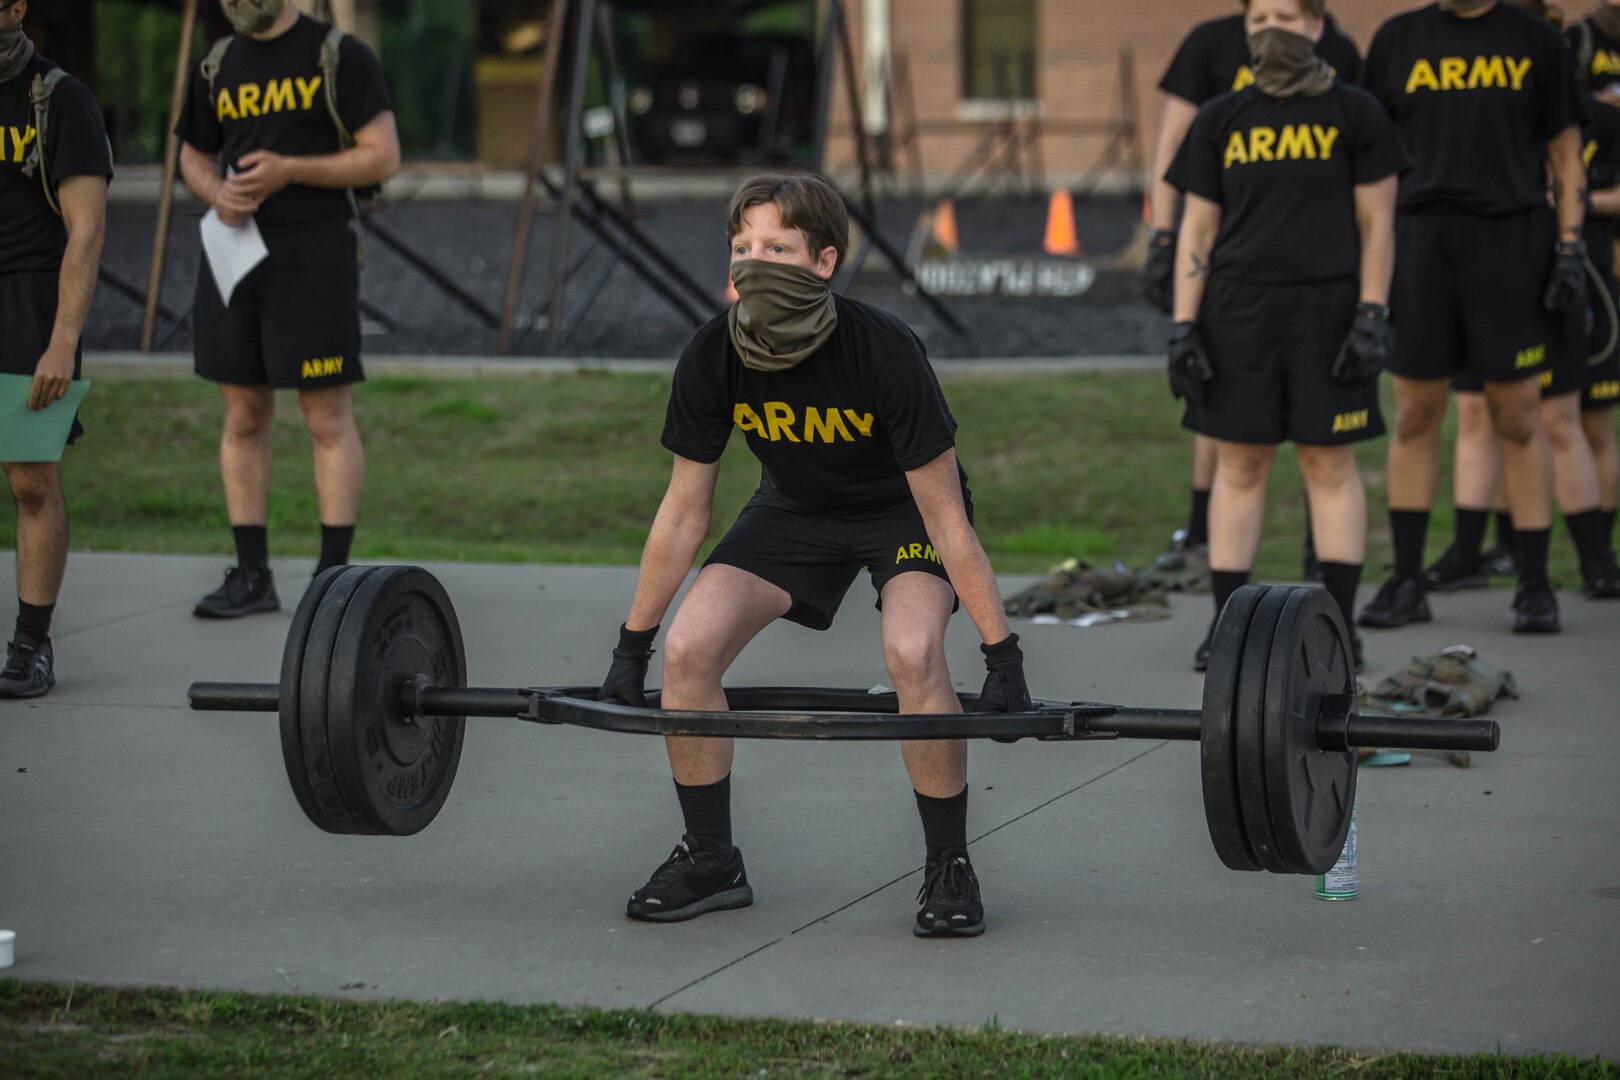 A soldier in initial military training lifts a barbell at Fort Jackson, South Carolina, May 11, 2020.